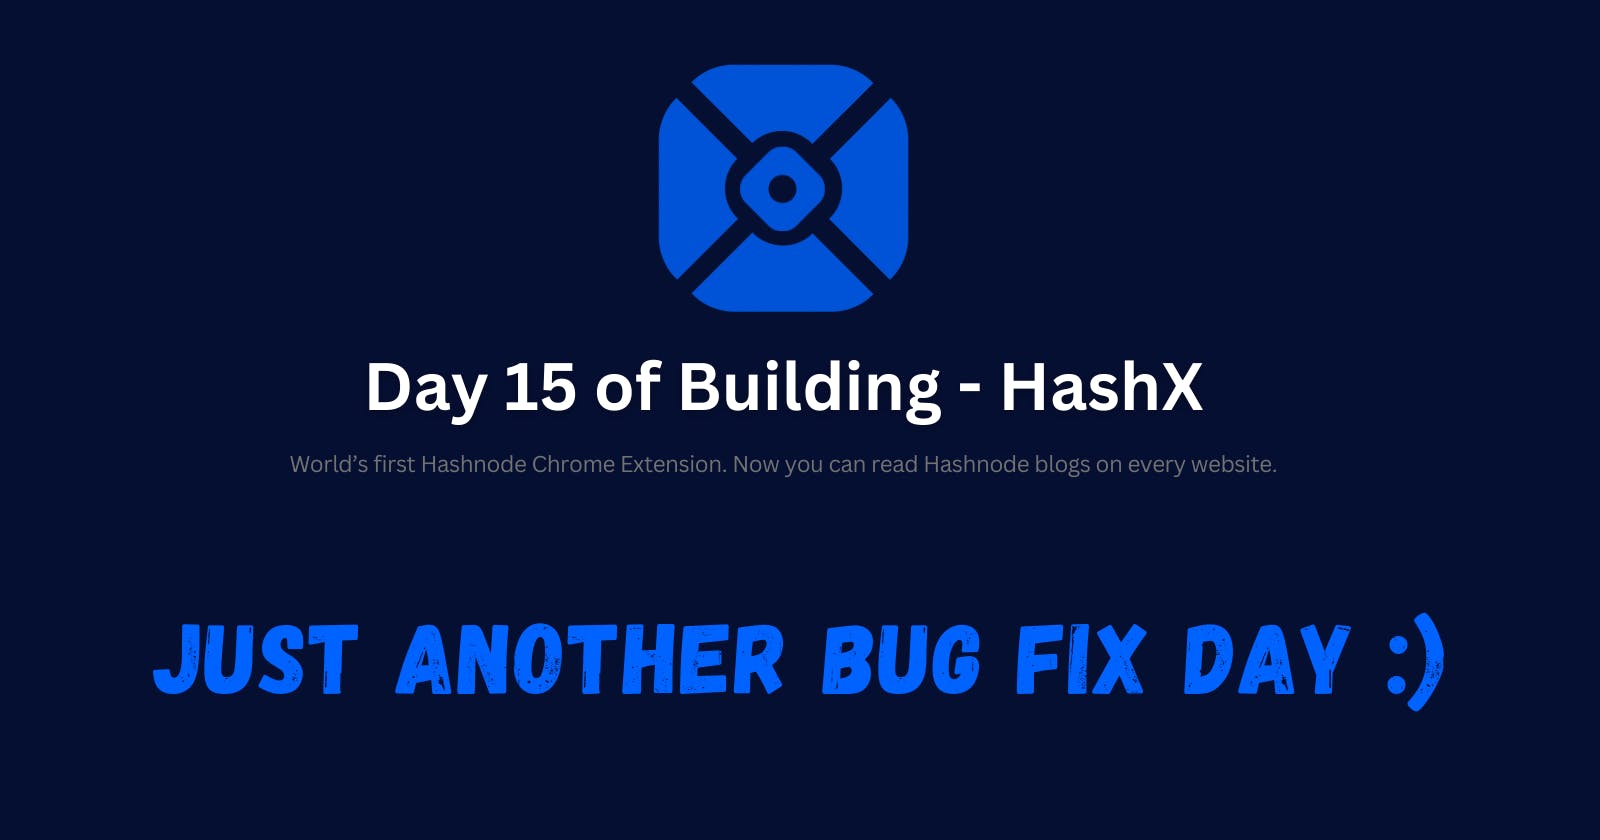 Day 15 - Just another Bug Fix Day :)